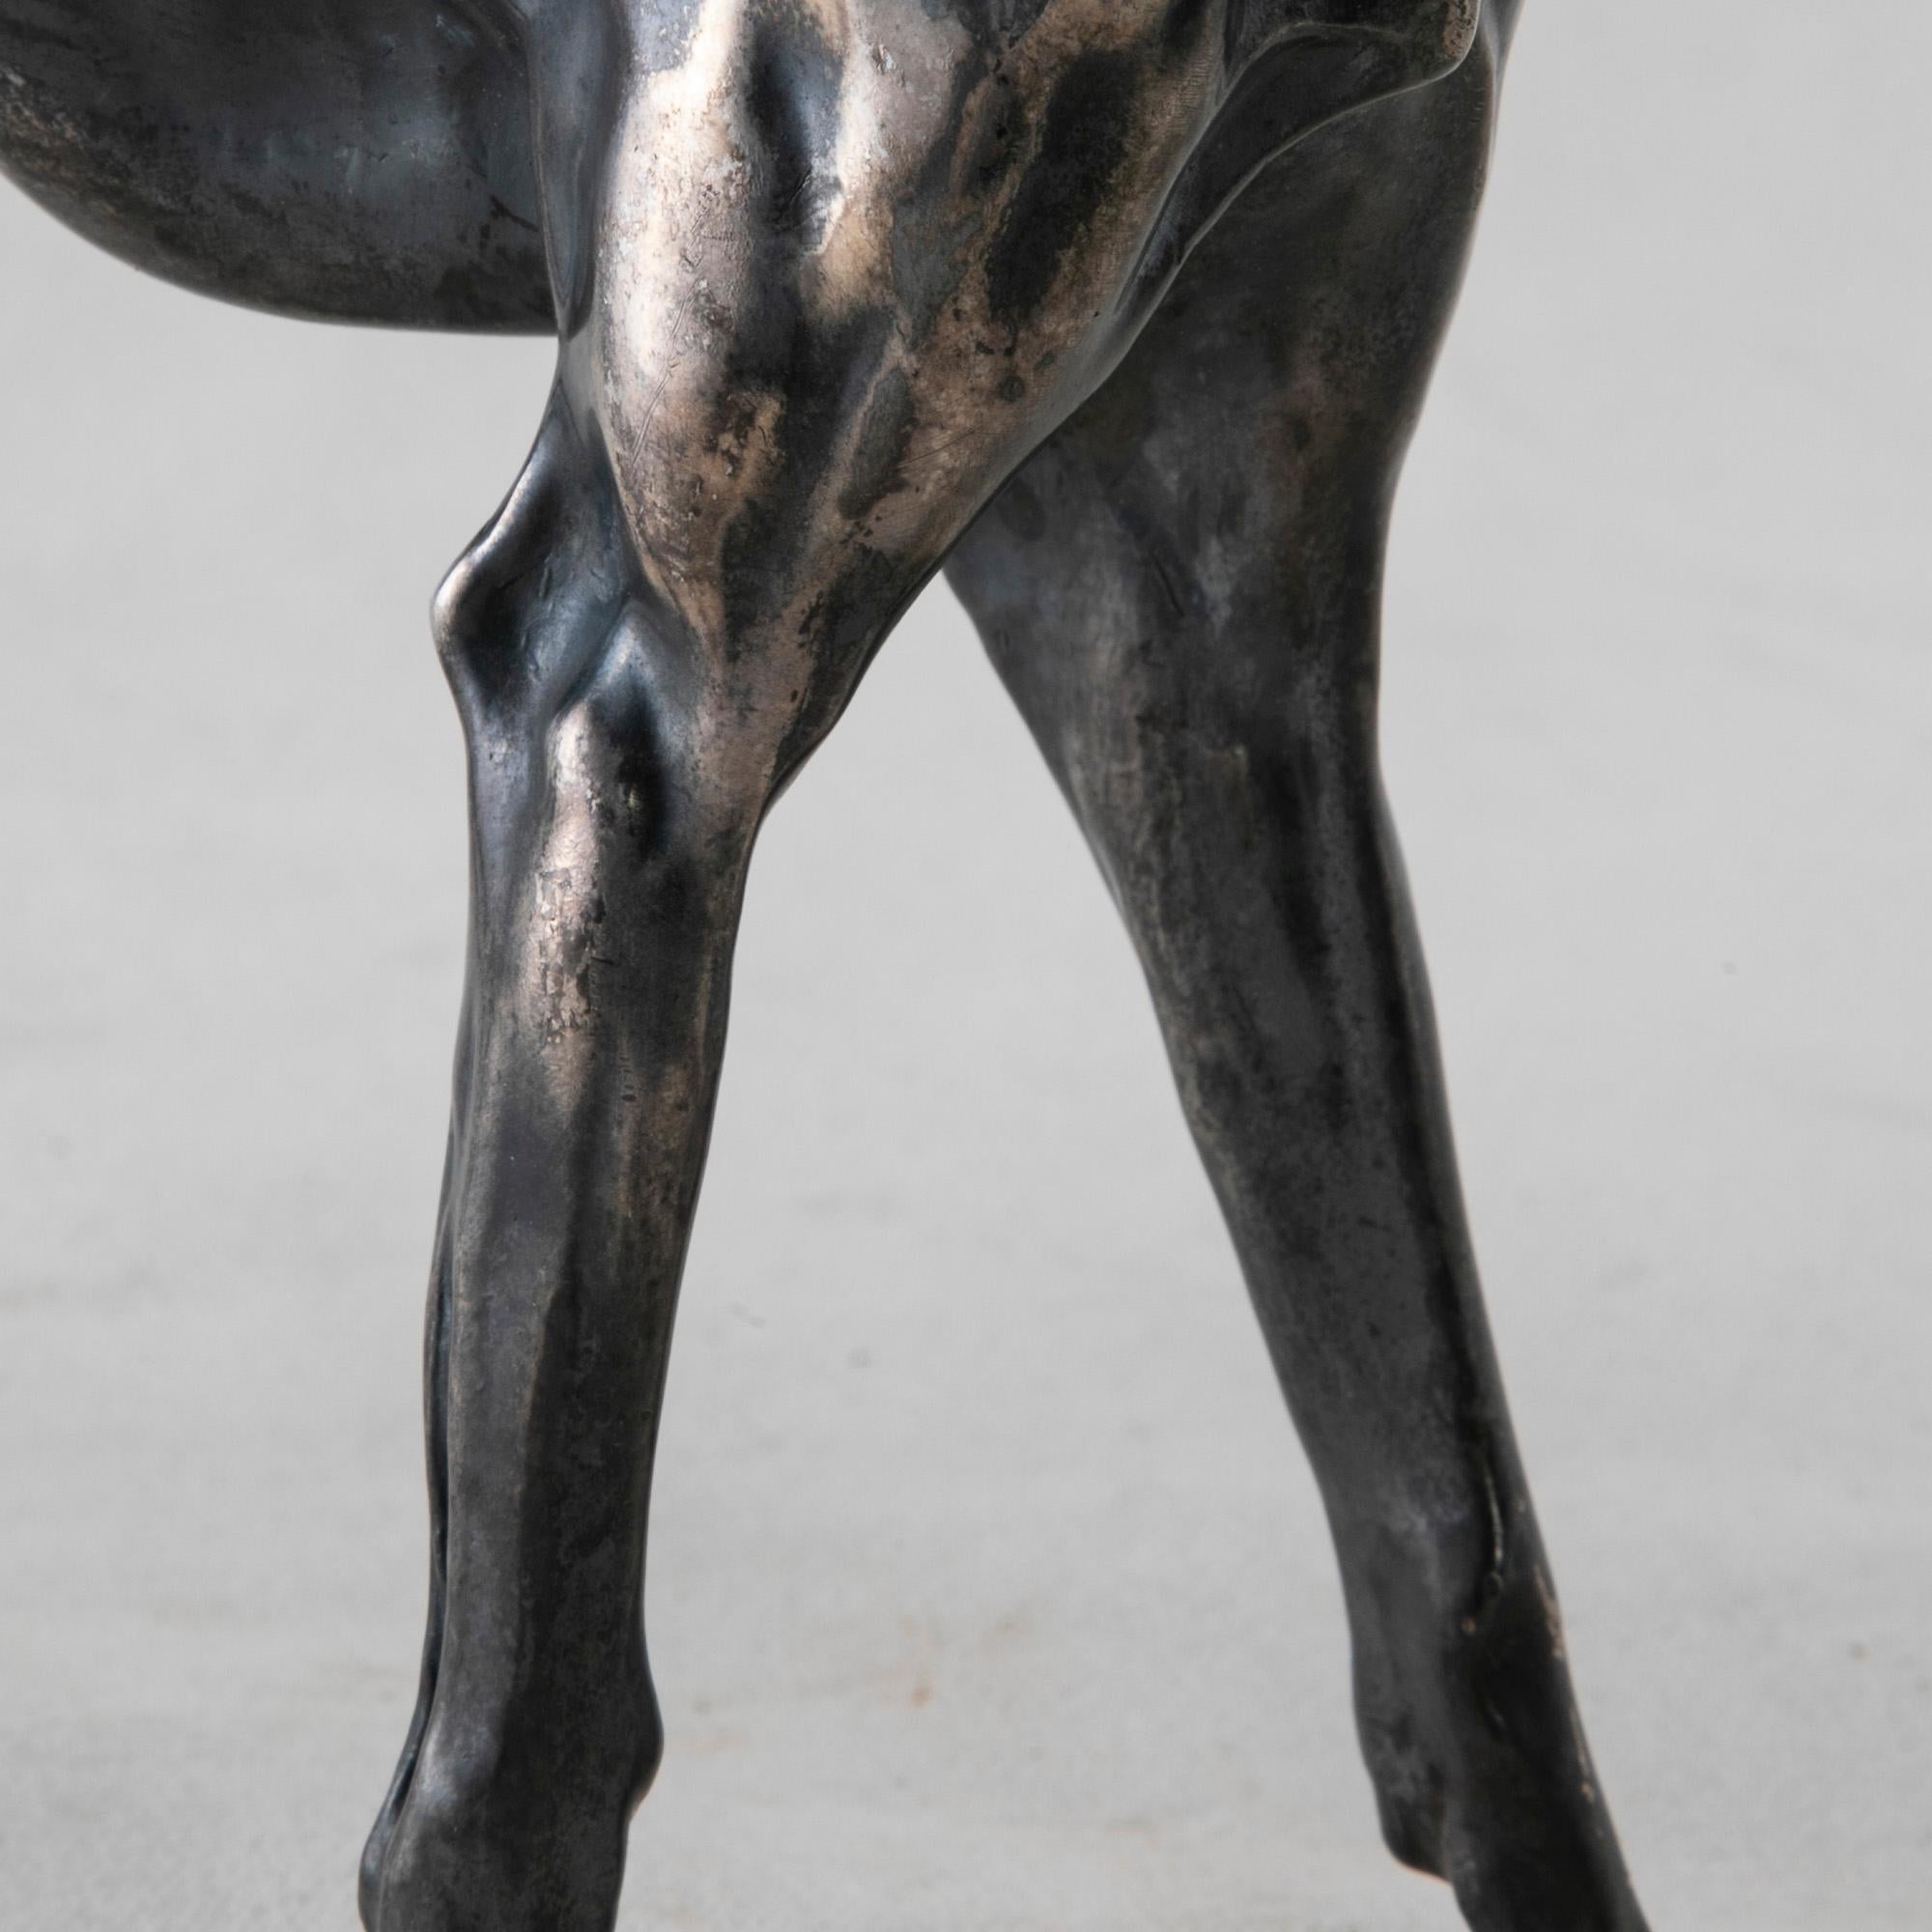 Early 20th Century French Greyhound Sculpture with Original Silver Patina 4